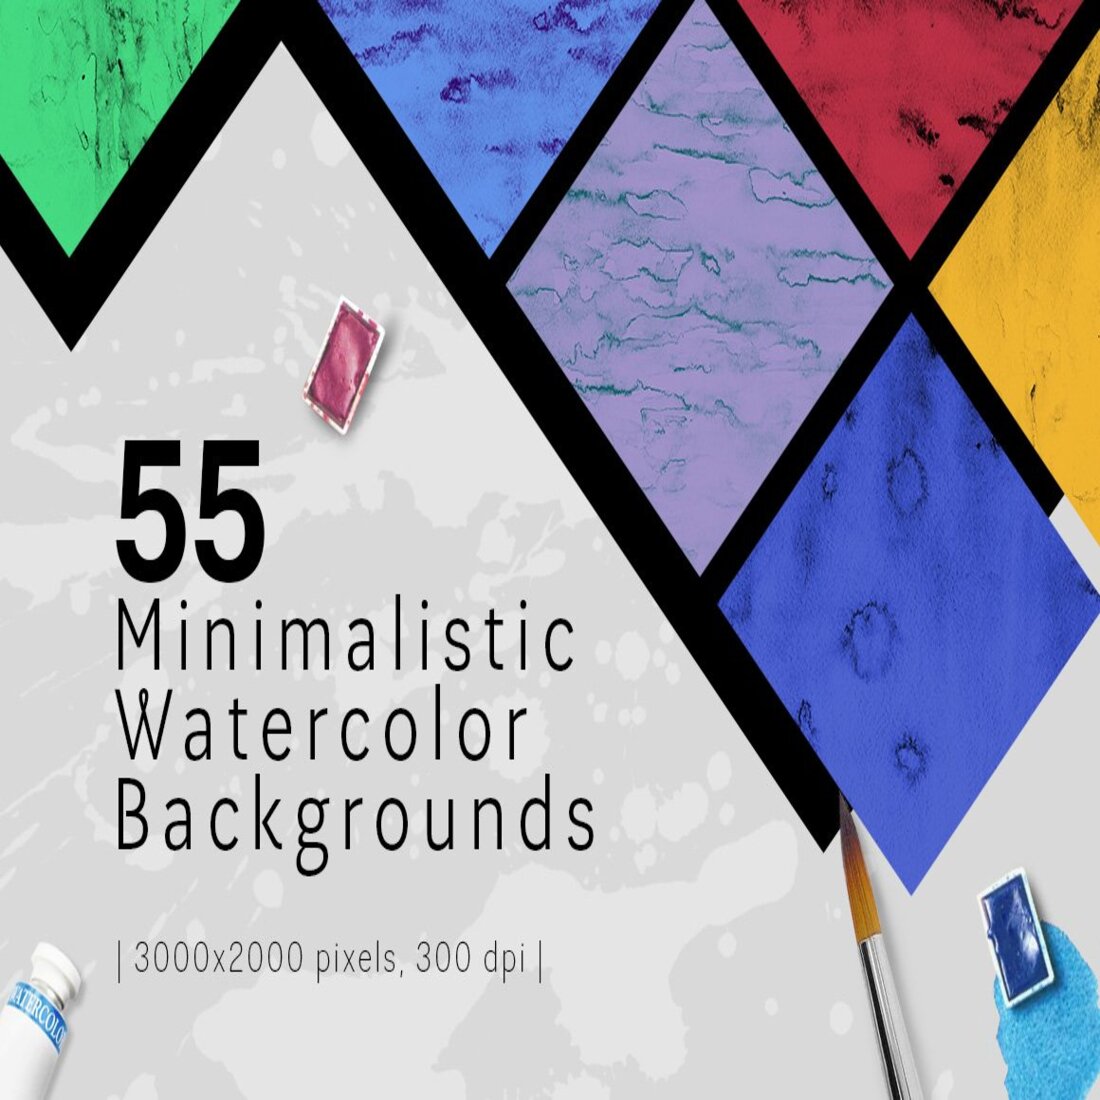 55 Watercolor Backgrounds 50% OFF cover.